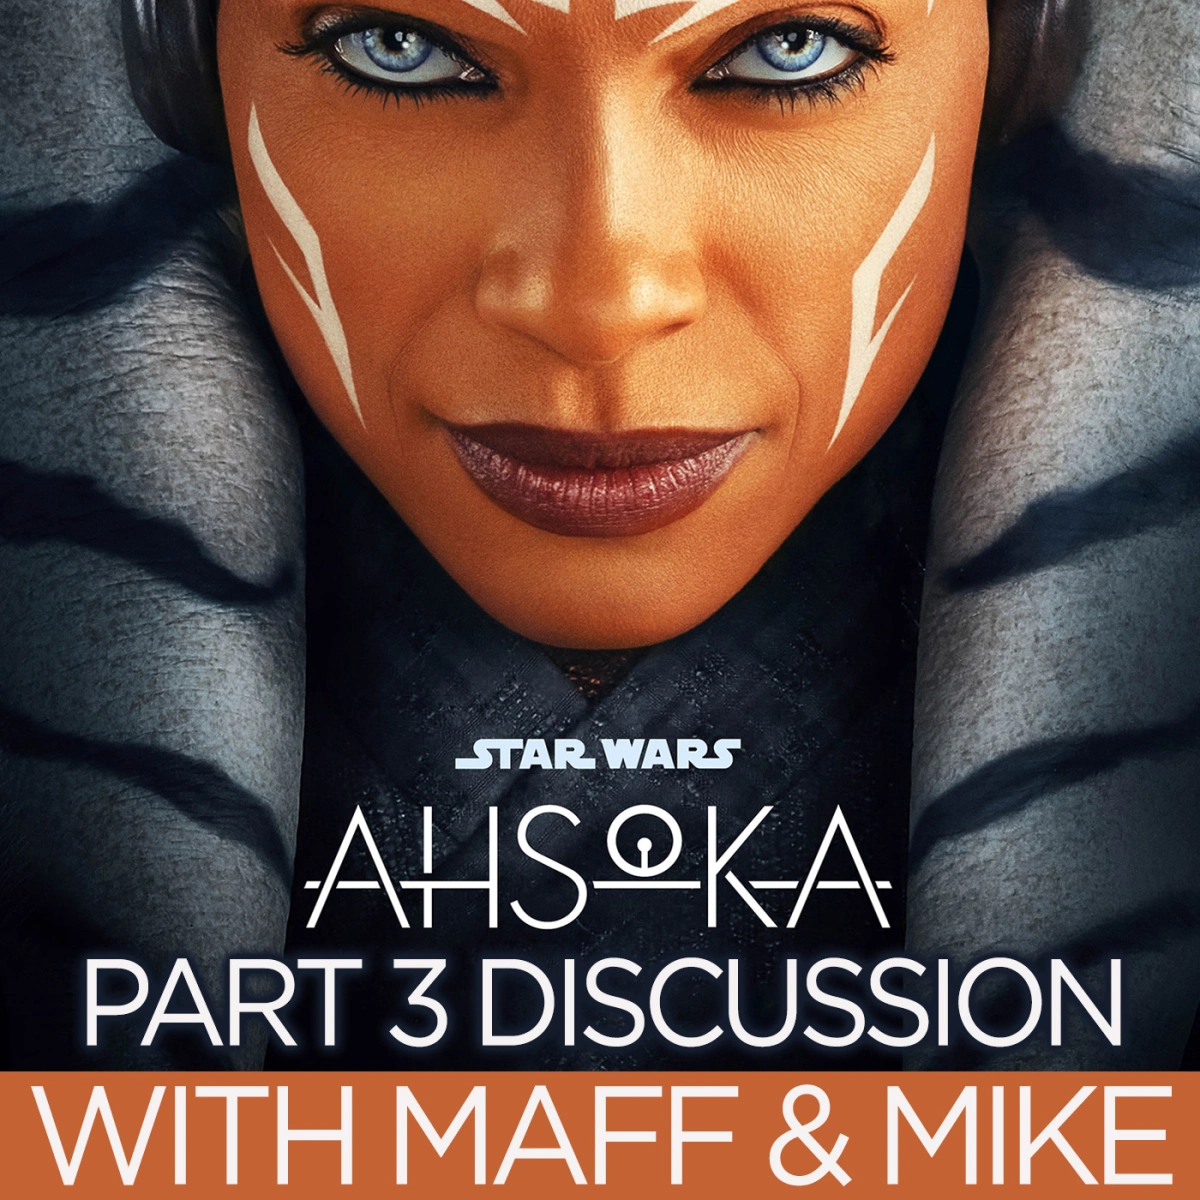 Ahsoka Part 3 Discussion: What Is Hera’s Role And Should Starkiller Be Made Canon? The Eye Of Sion, Purrgil, Jacen Syndulla, Mandalorian Jedi, Star Wars Resistance, Easter Eggs & More! With Maff & Mike